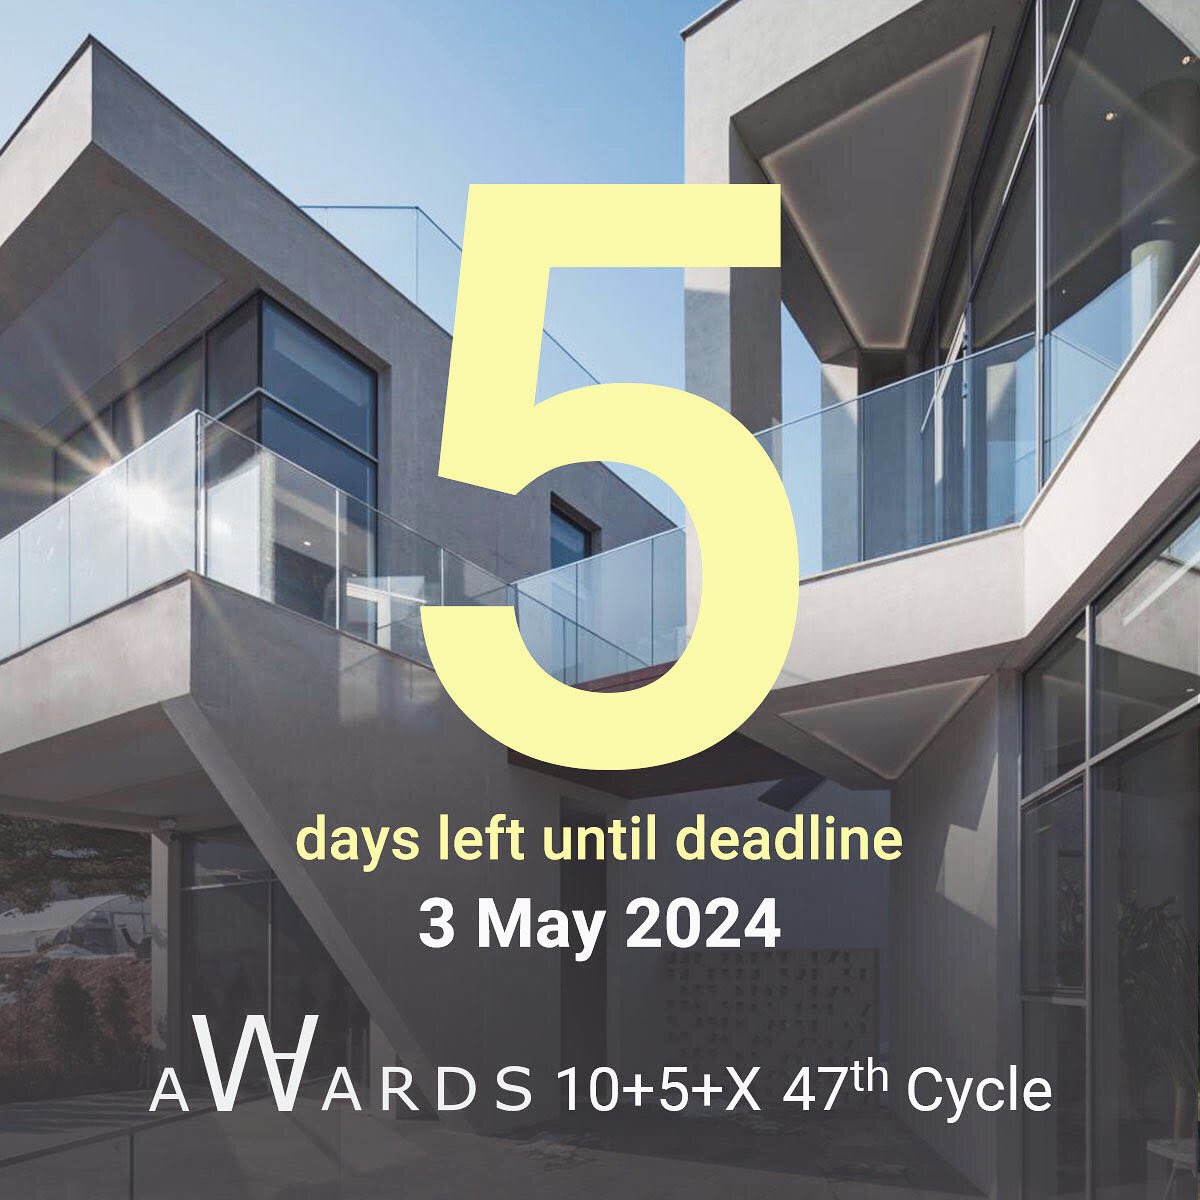 Only 5 days left to enter WA Awards 10+5+X 47th Cycle: worldarchitecture.org/architecture-n… #WAawards